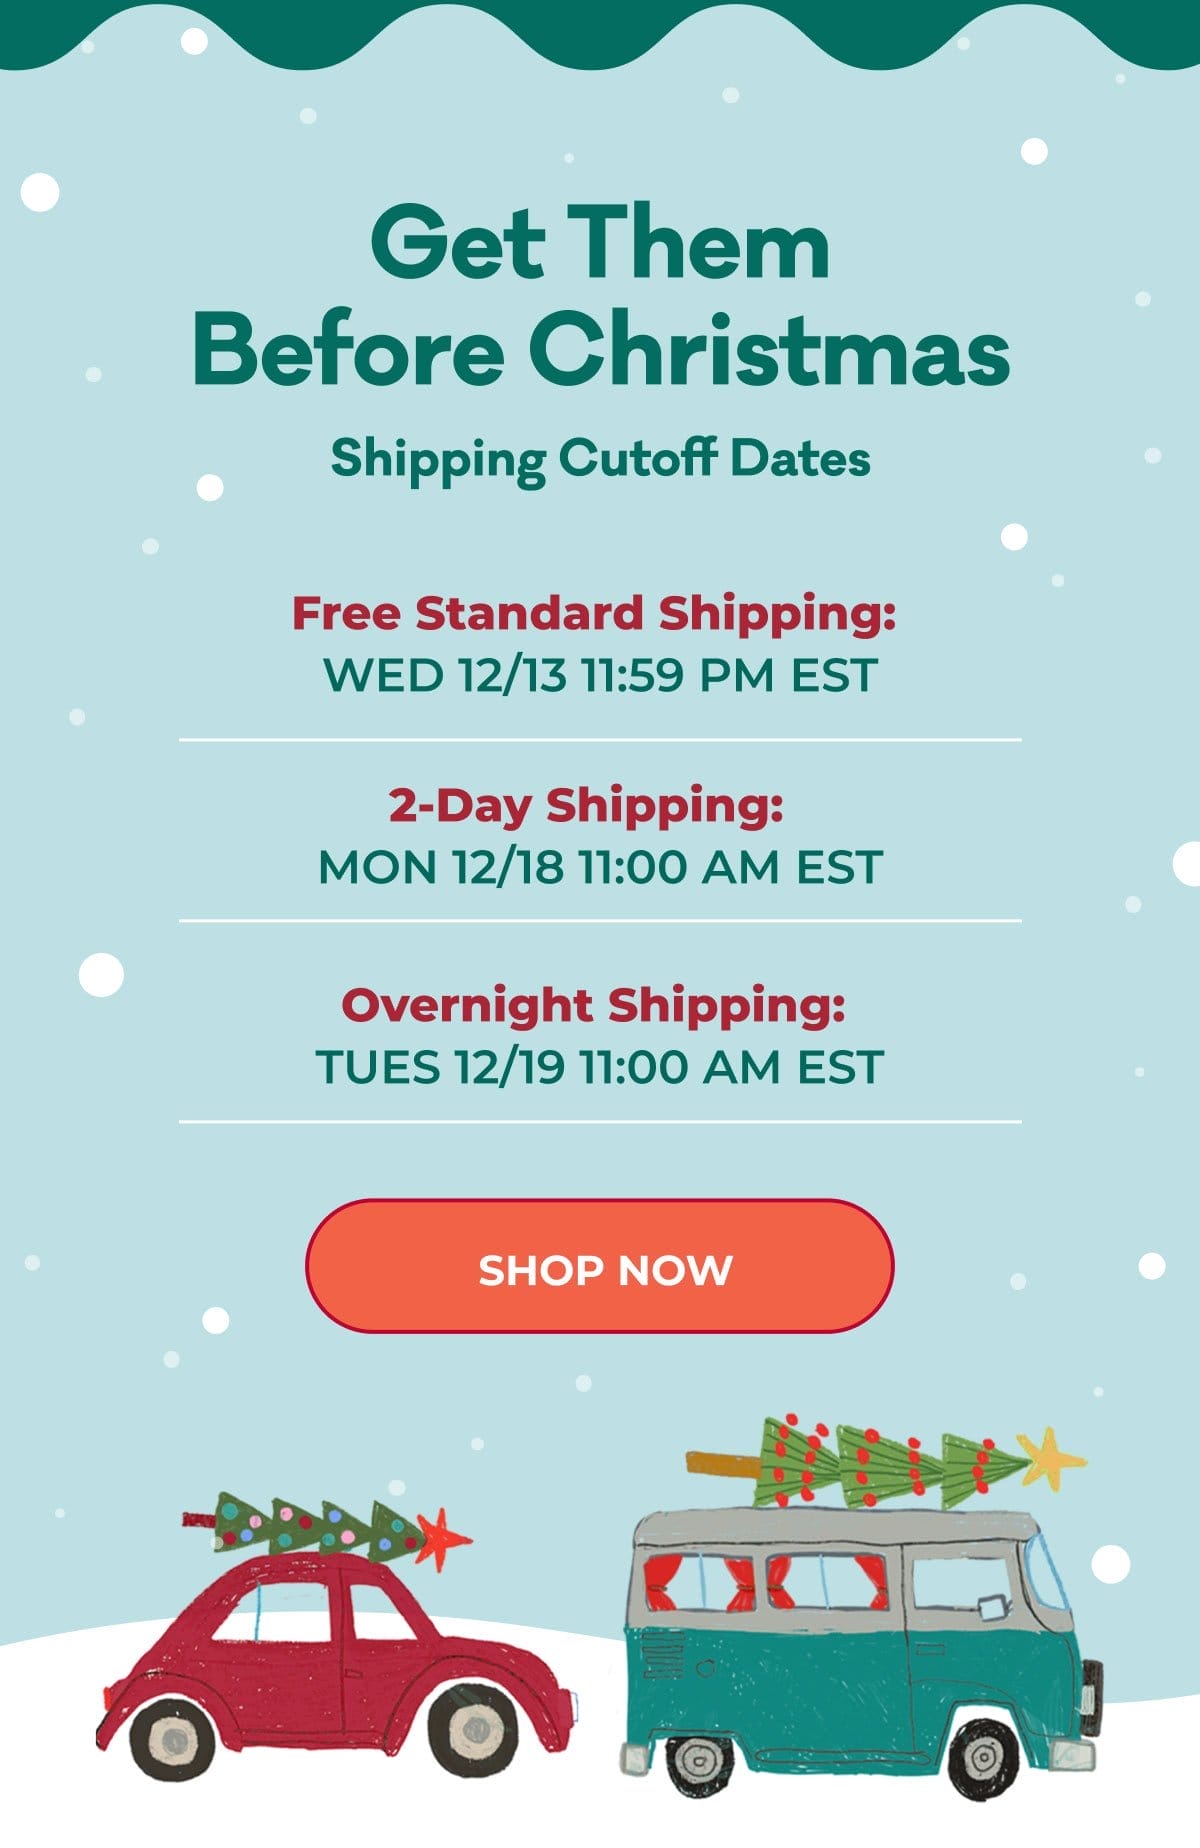 Get Them Before Christmas | Shipping Cutoff Dates: Free Standard Shipping: WED 12/13 11:59 PM EST | 2-Day Shipping: MON 12/18 11:00 AM EST | Overnight Shipping: TUES 12/19 11:00 AM EST | SHOP NOW